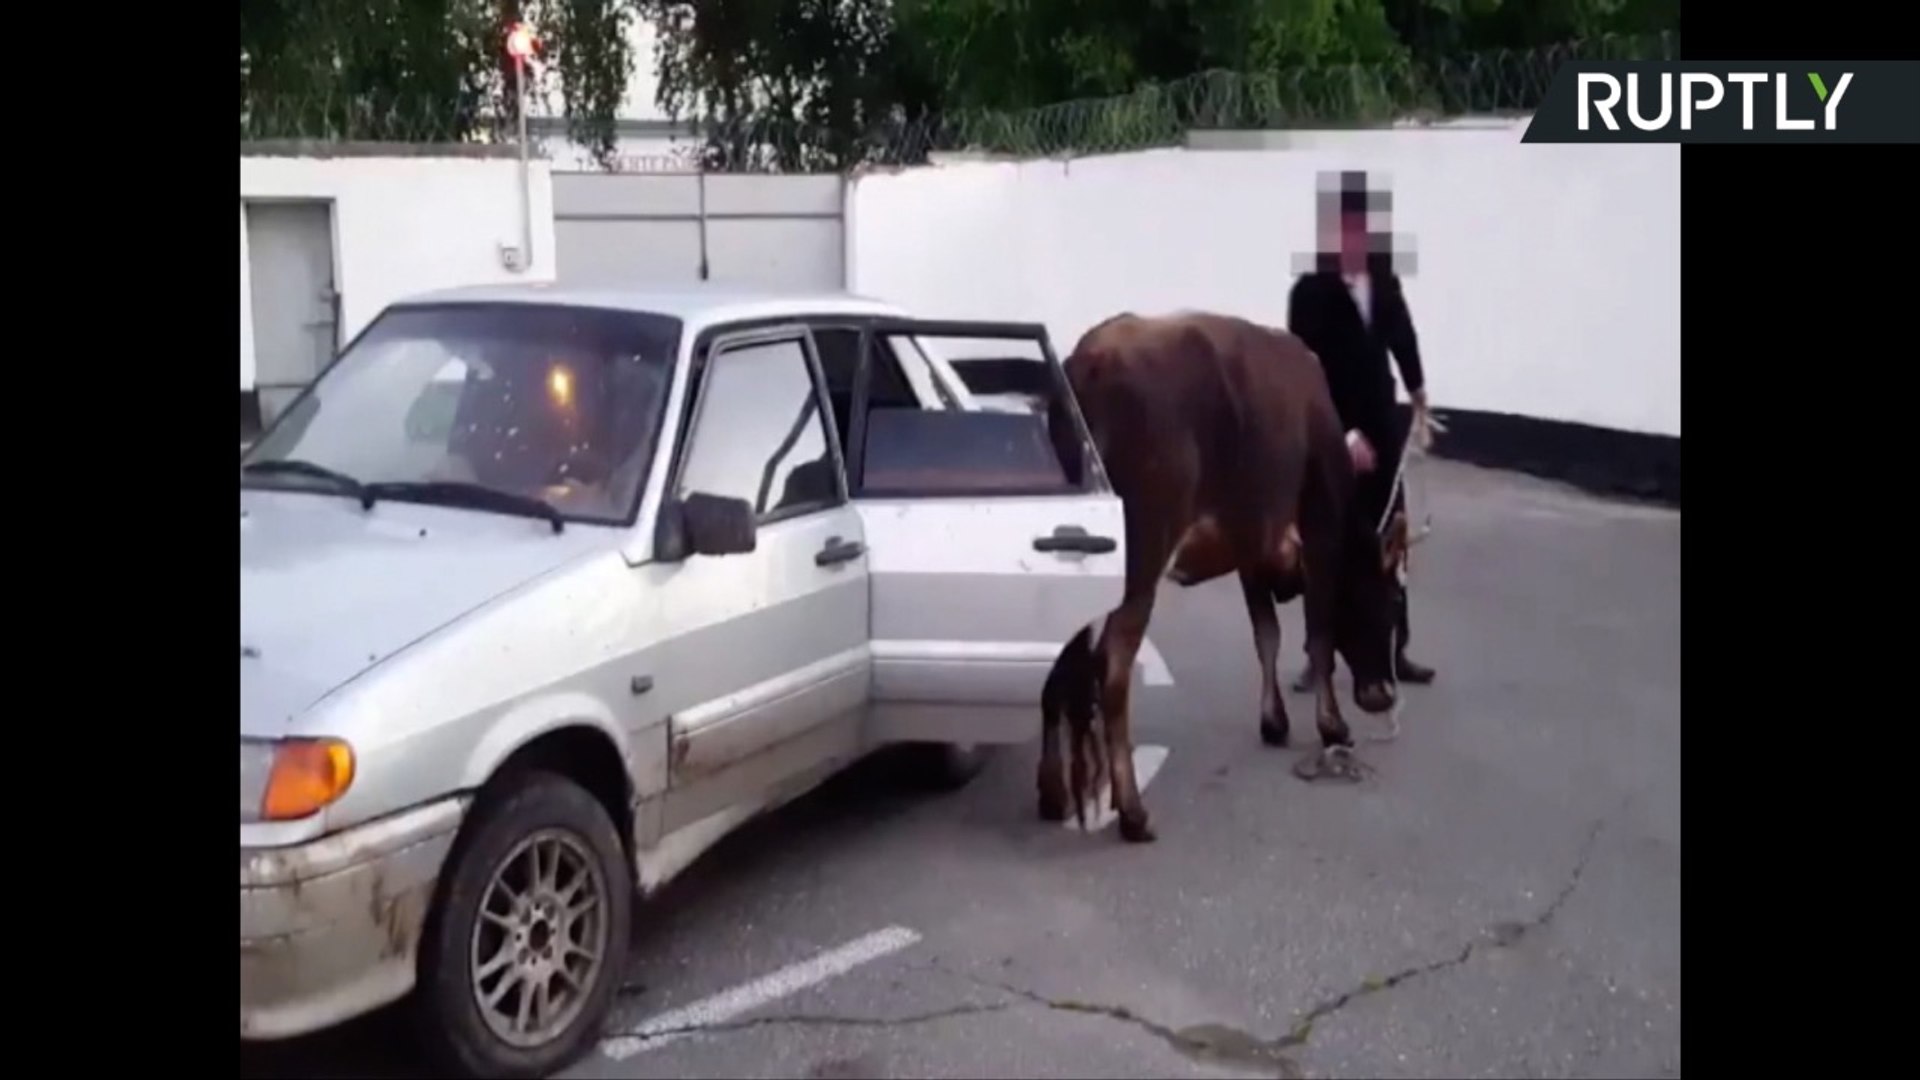 Traffic Police Udderly Baffled After Discovering Cow in Backseat of Car